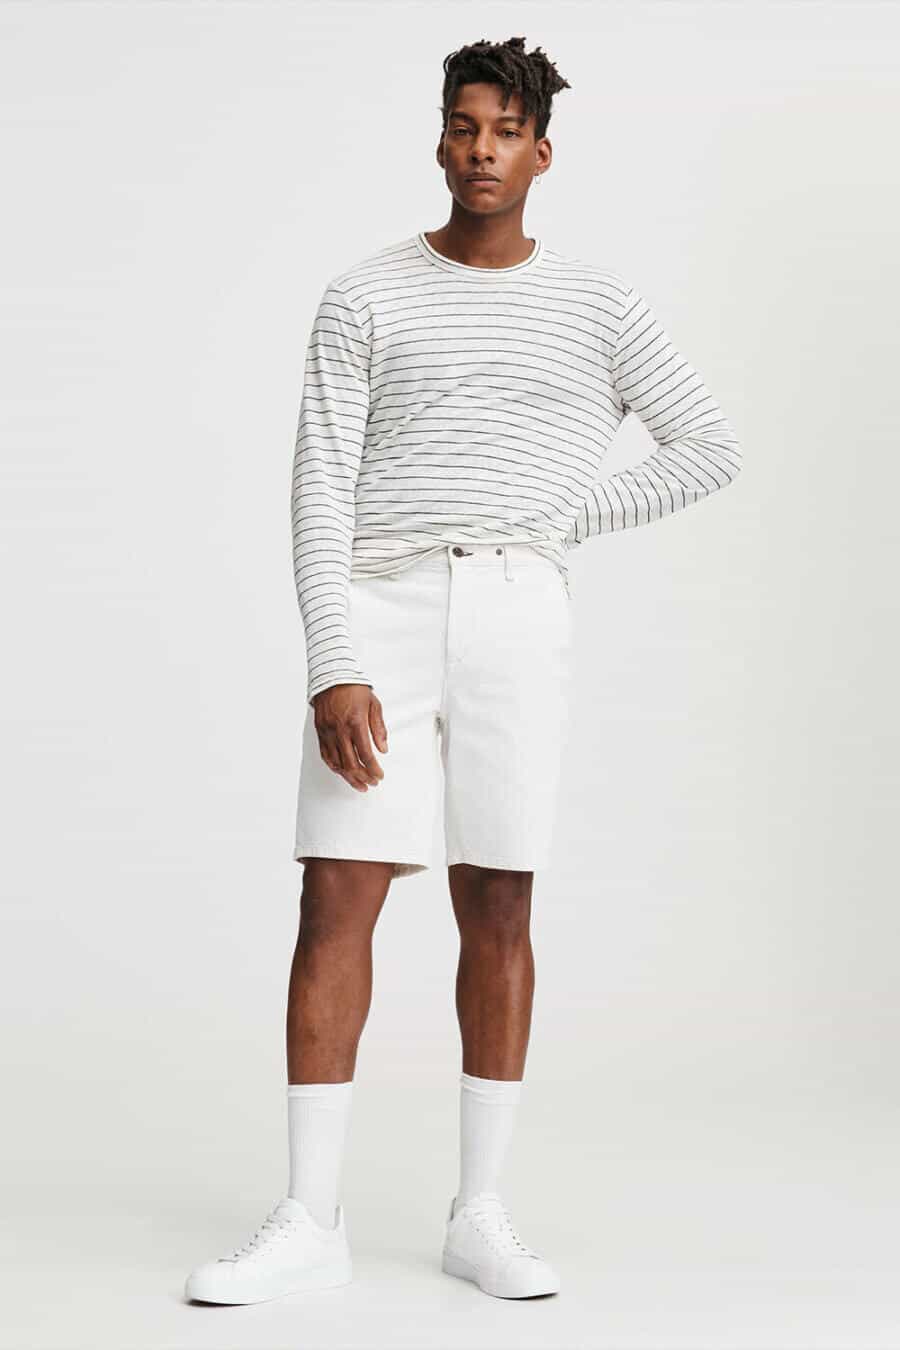 Men's all white summer outfit with shorts, top and sneakers